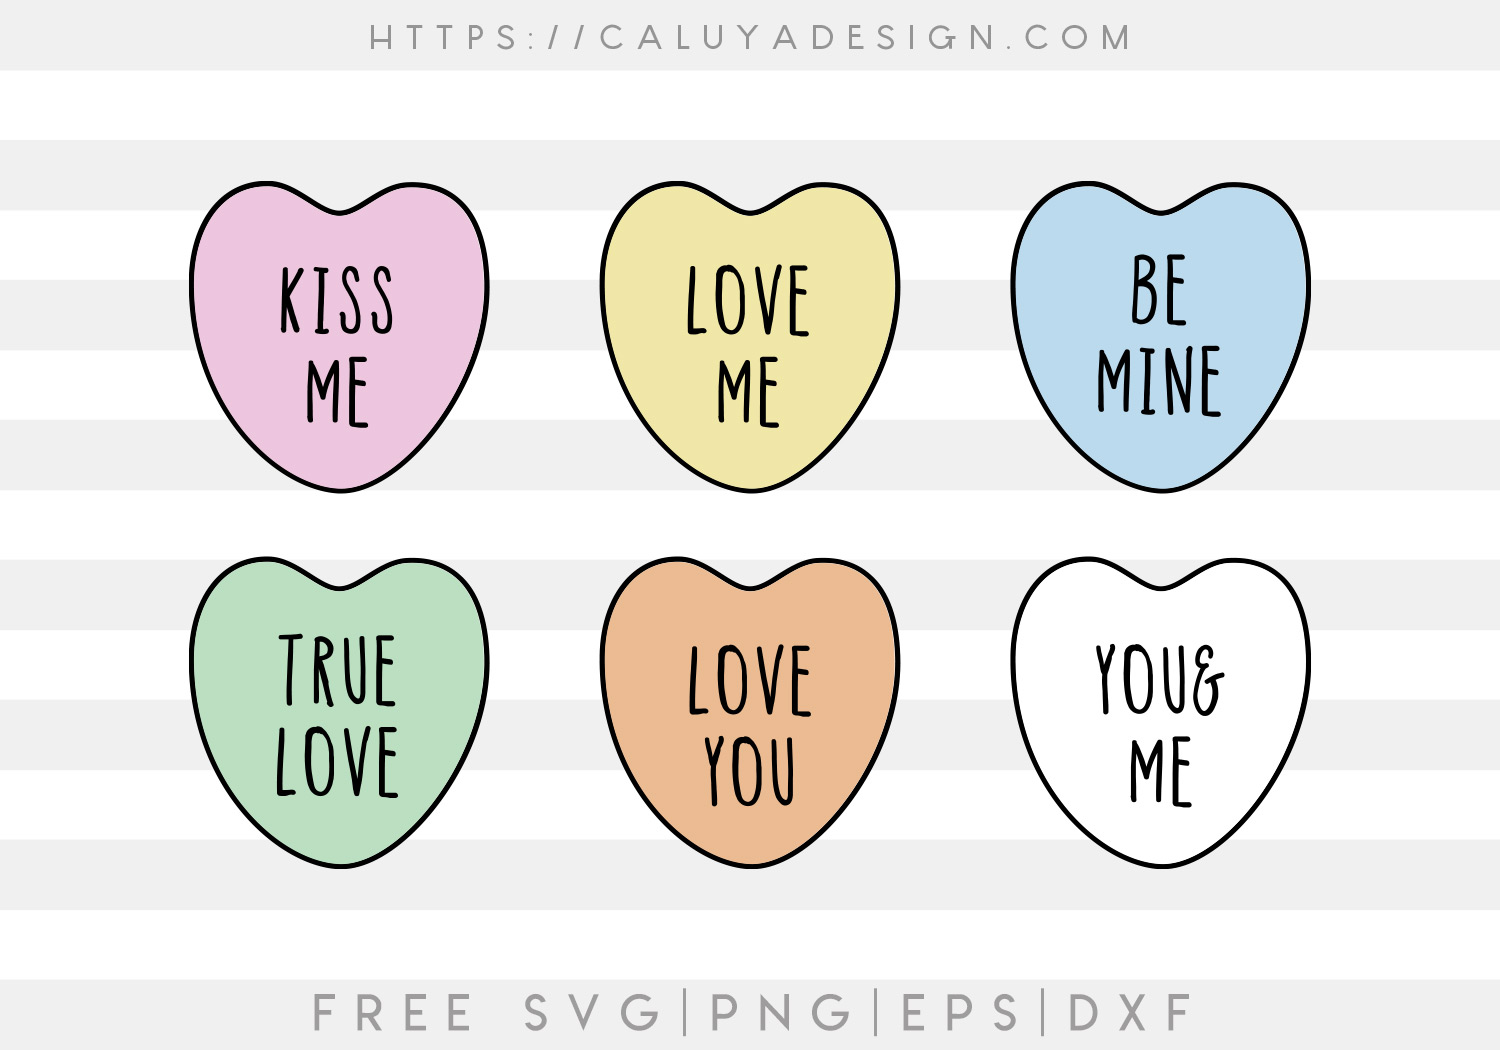 Free Valentine's Candy SVG, PNG, EPS & DXF by Caluya Design